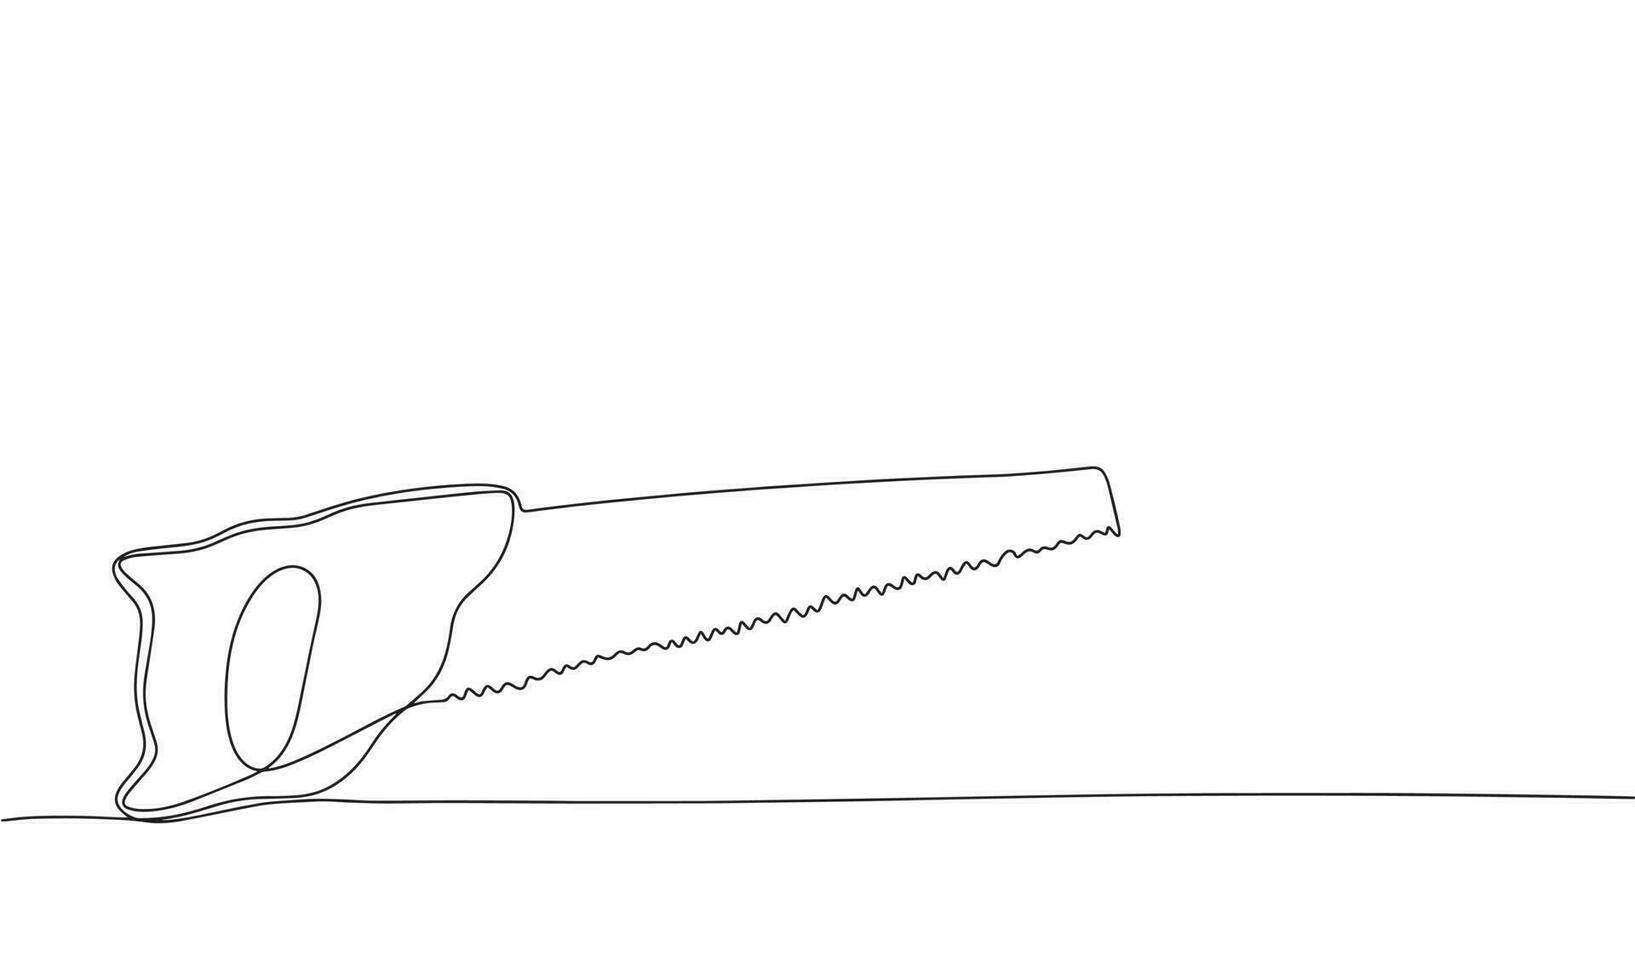 Saw tool. One line continuous saw. Line art, outline, single line silhouette. Hand drawn vector illustration.